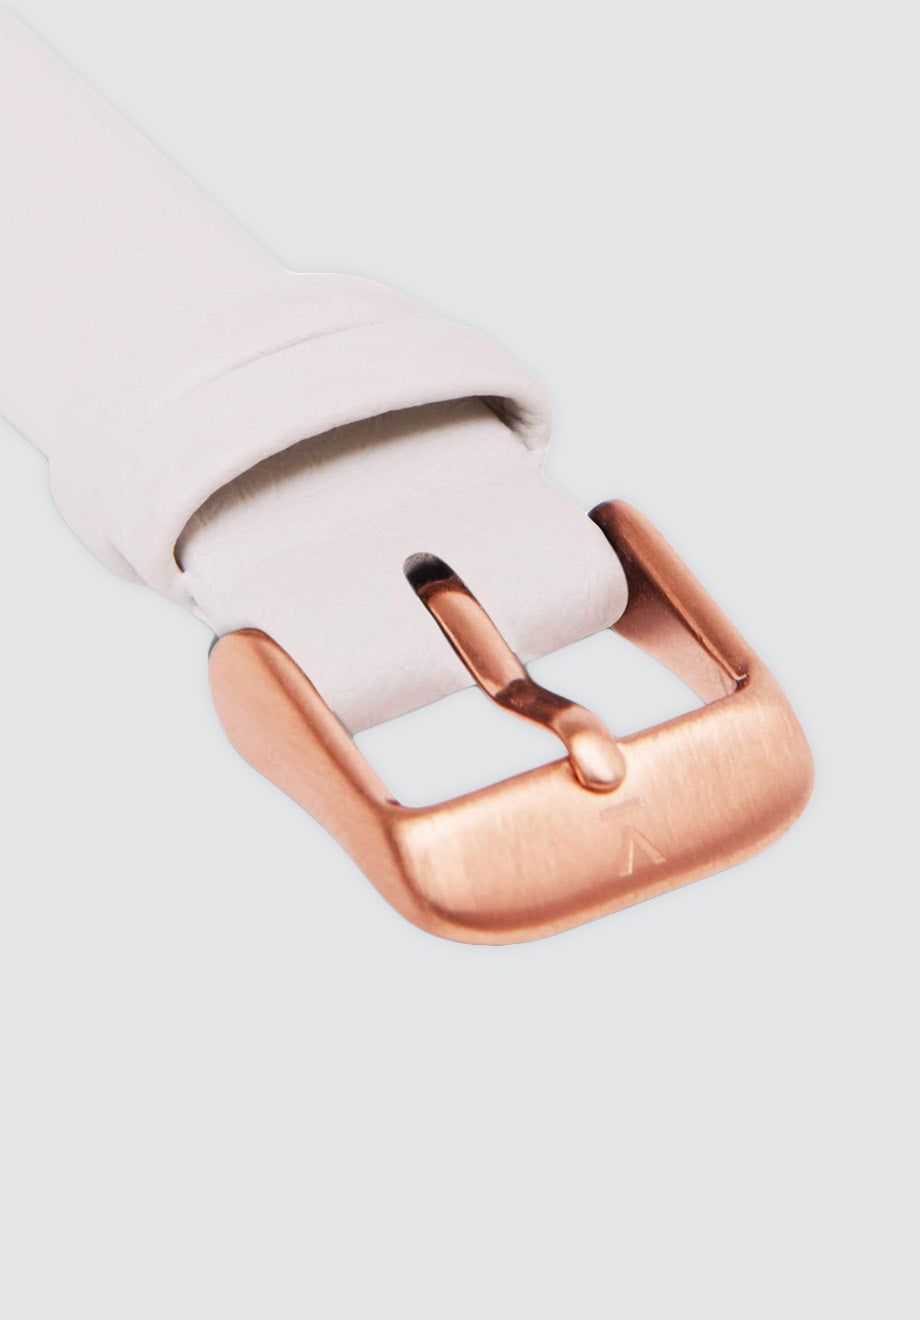 Kindred Watch | Rose Gold & Light Grey